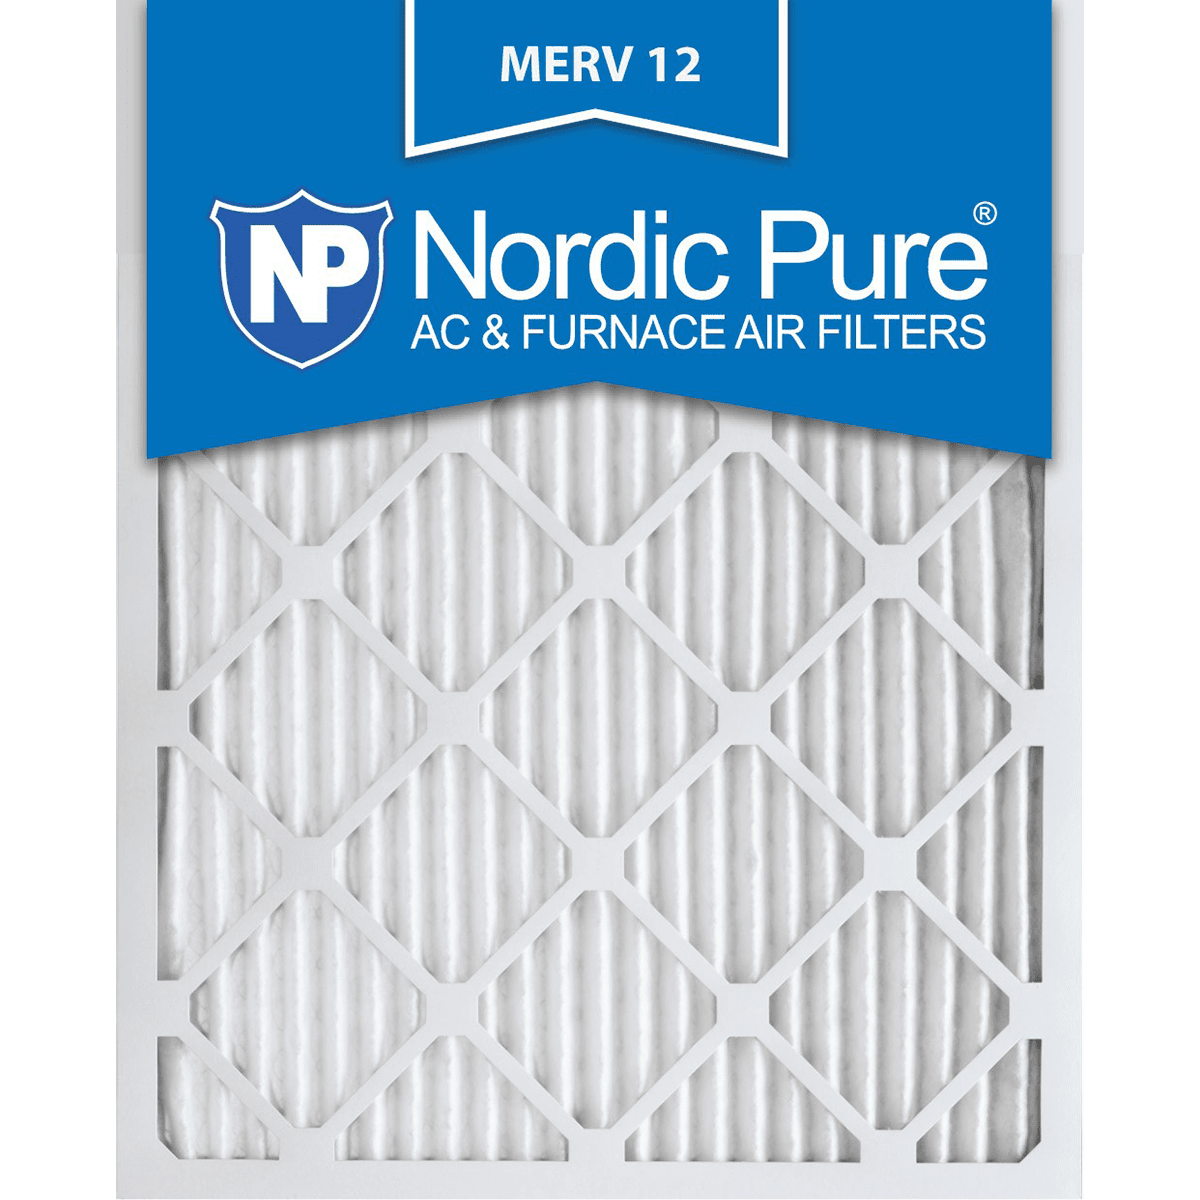 Nordic Pure MERV 12 Pleated Furnace Filter 16x20x1 6-Pack (16x20x1M12-6)